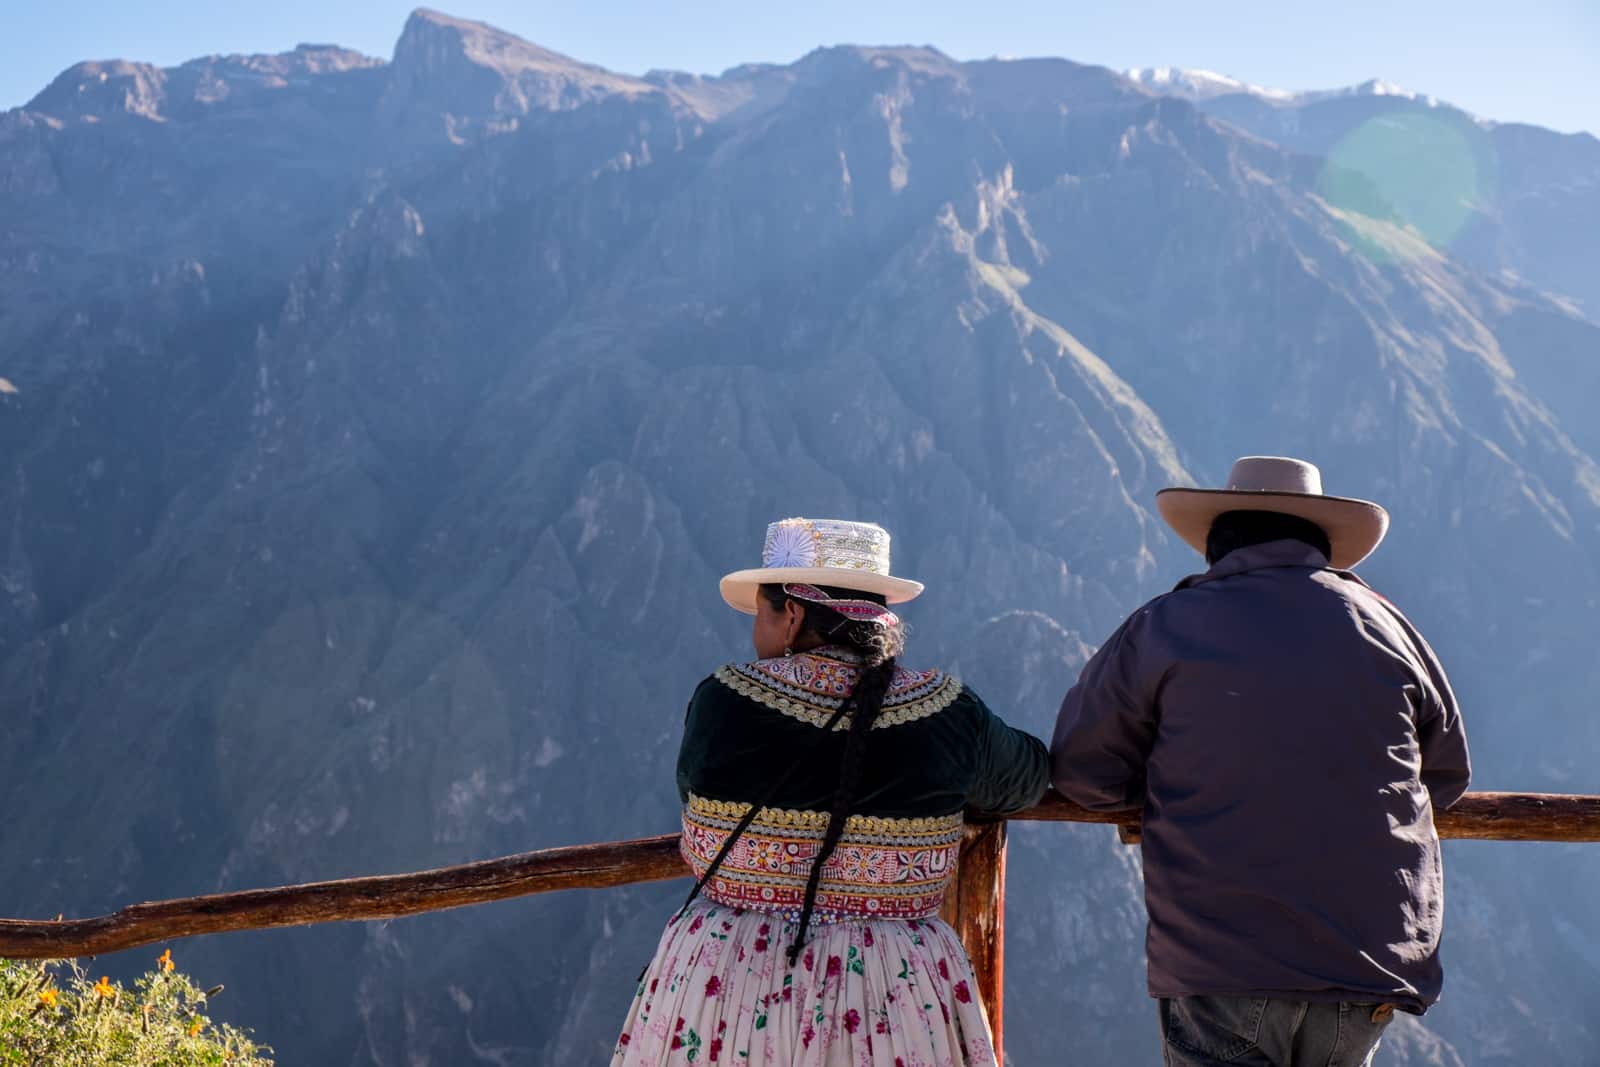 A Peruvian couple in traditional dress at a viewing point overlooking Colca Canyon near Araquipa, Peru.